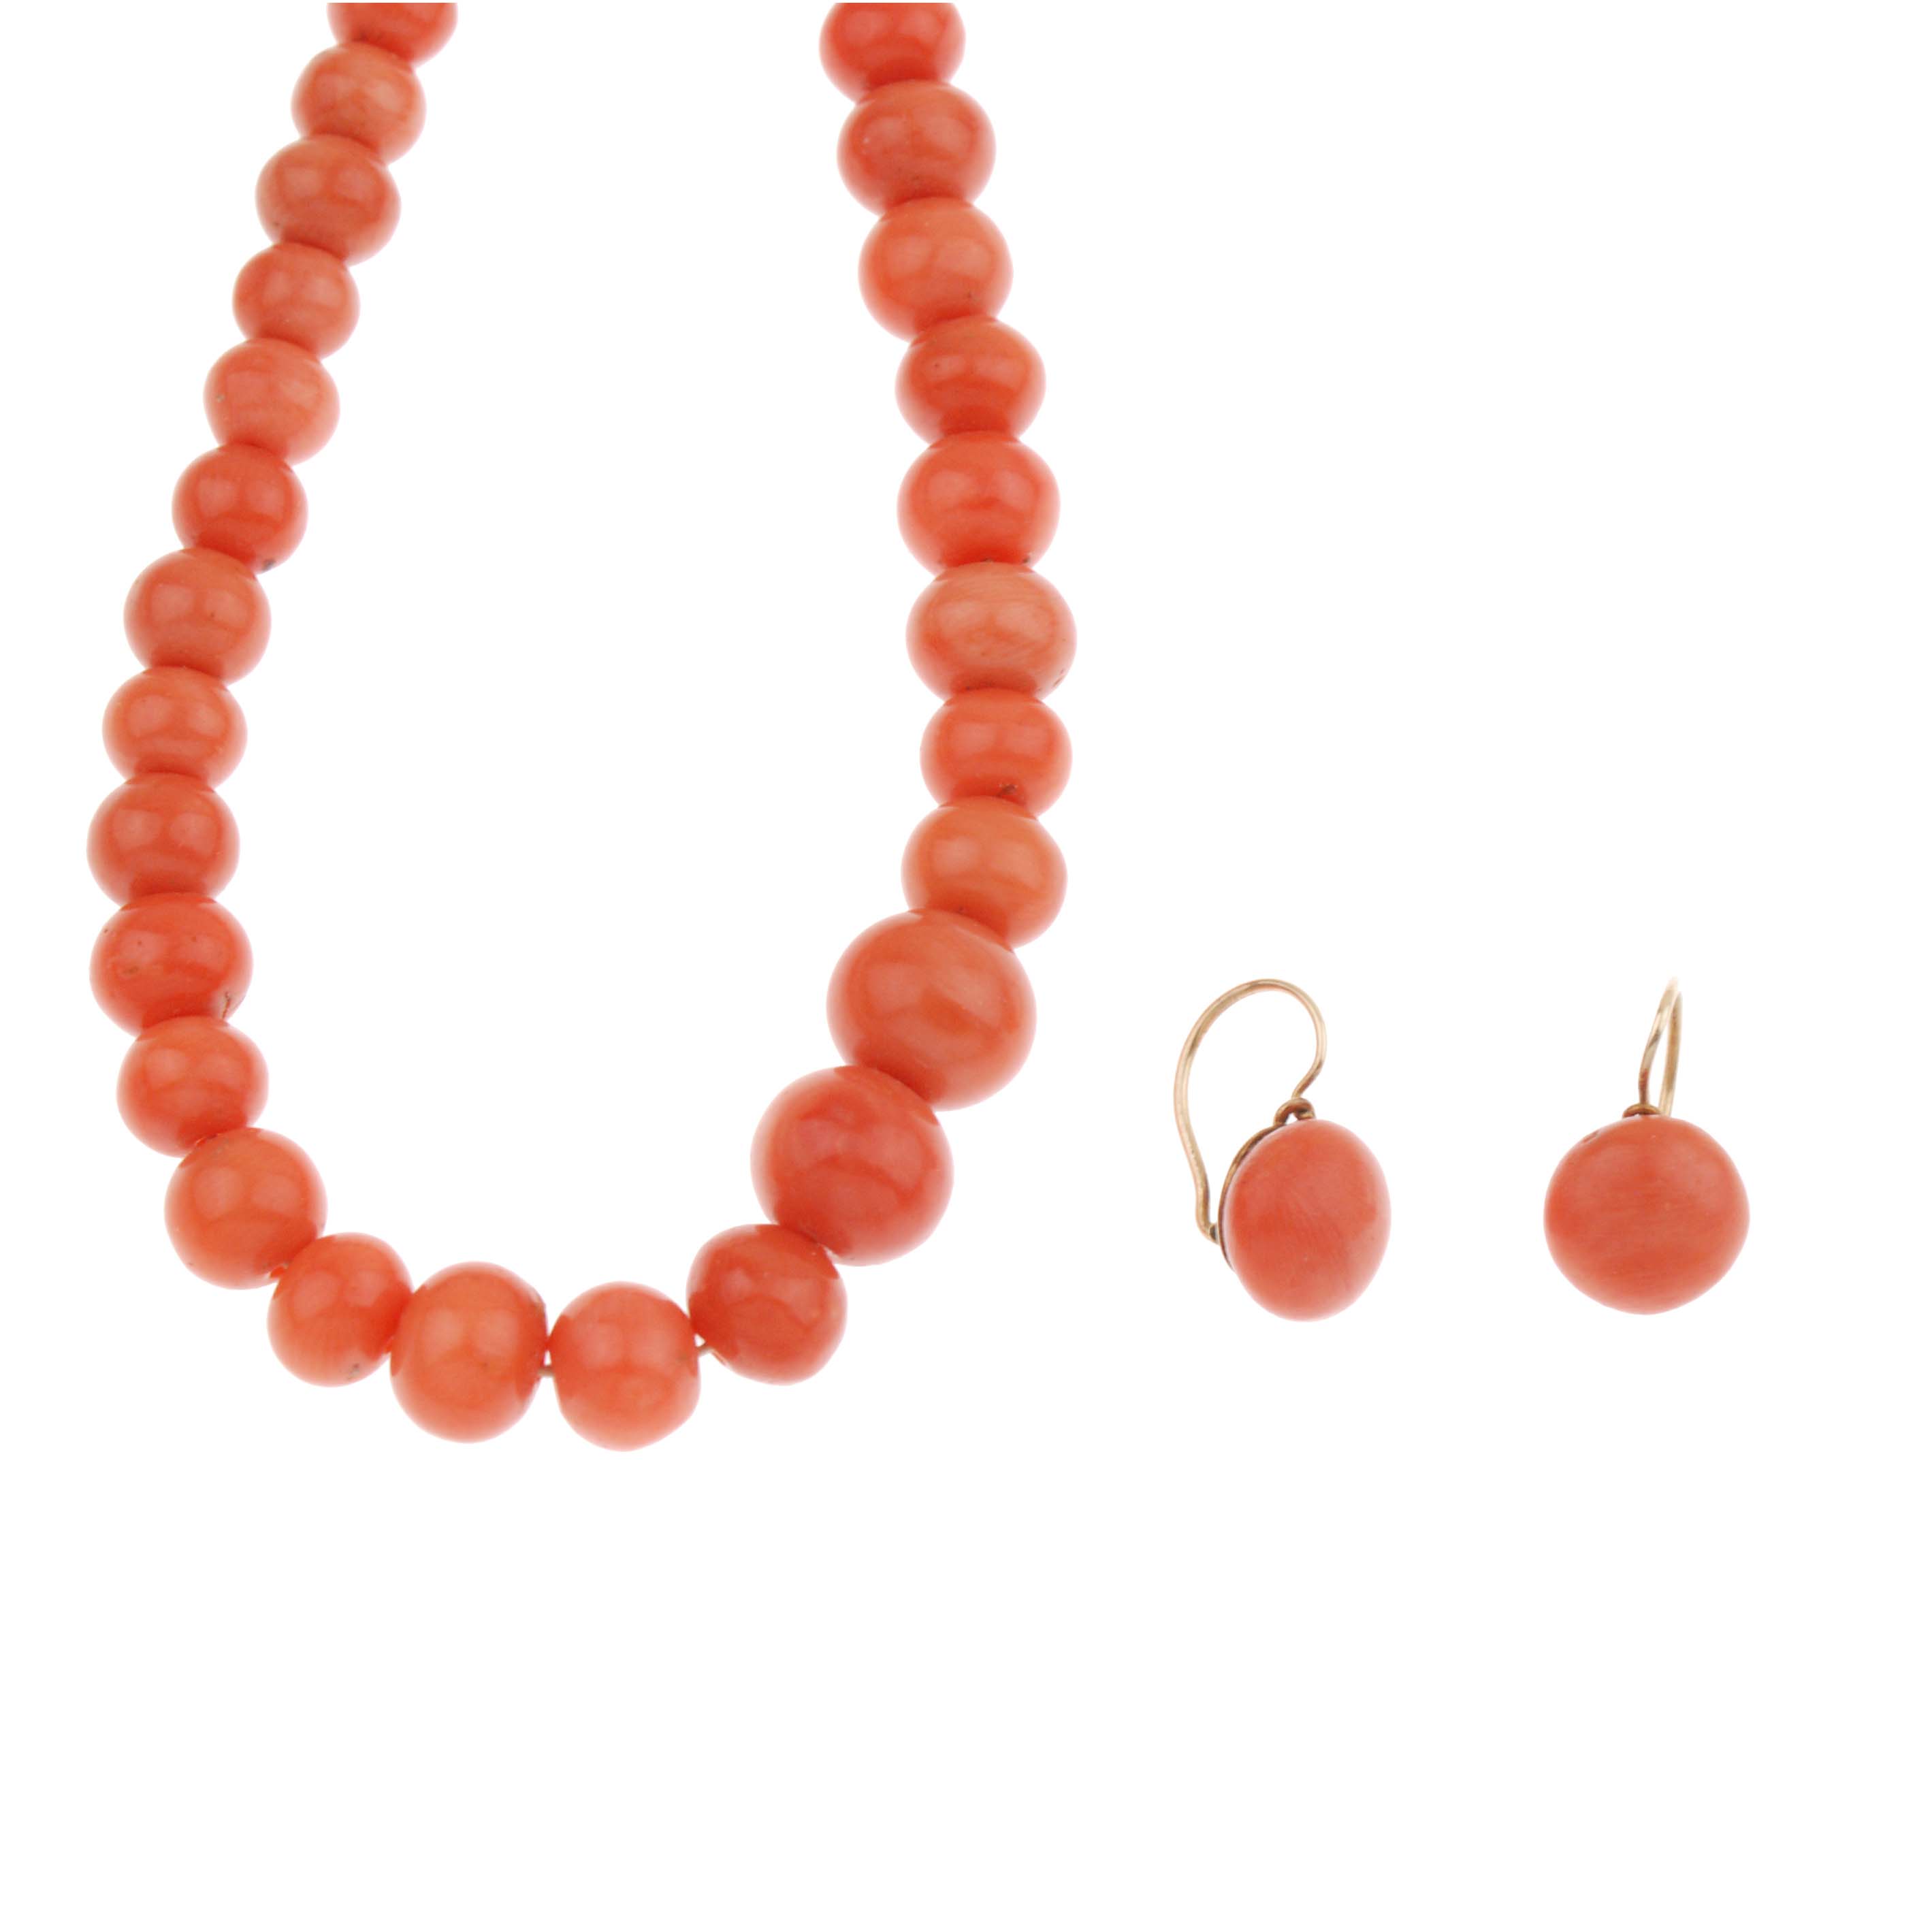 CORAL NECKLACE AND EARRINGS